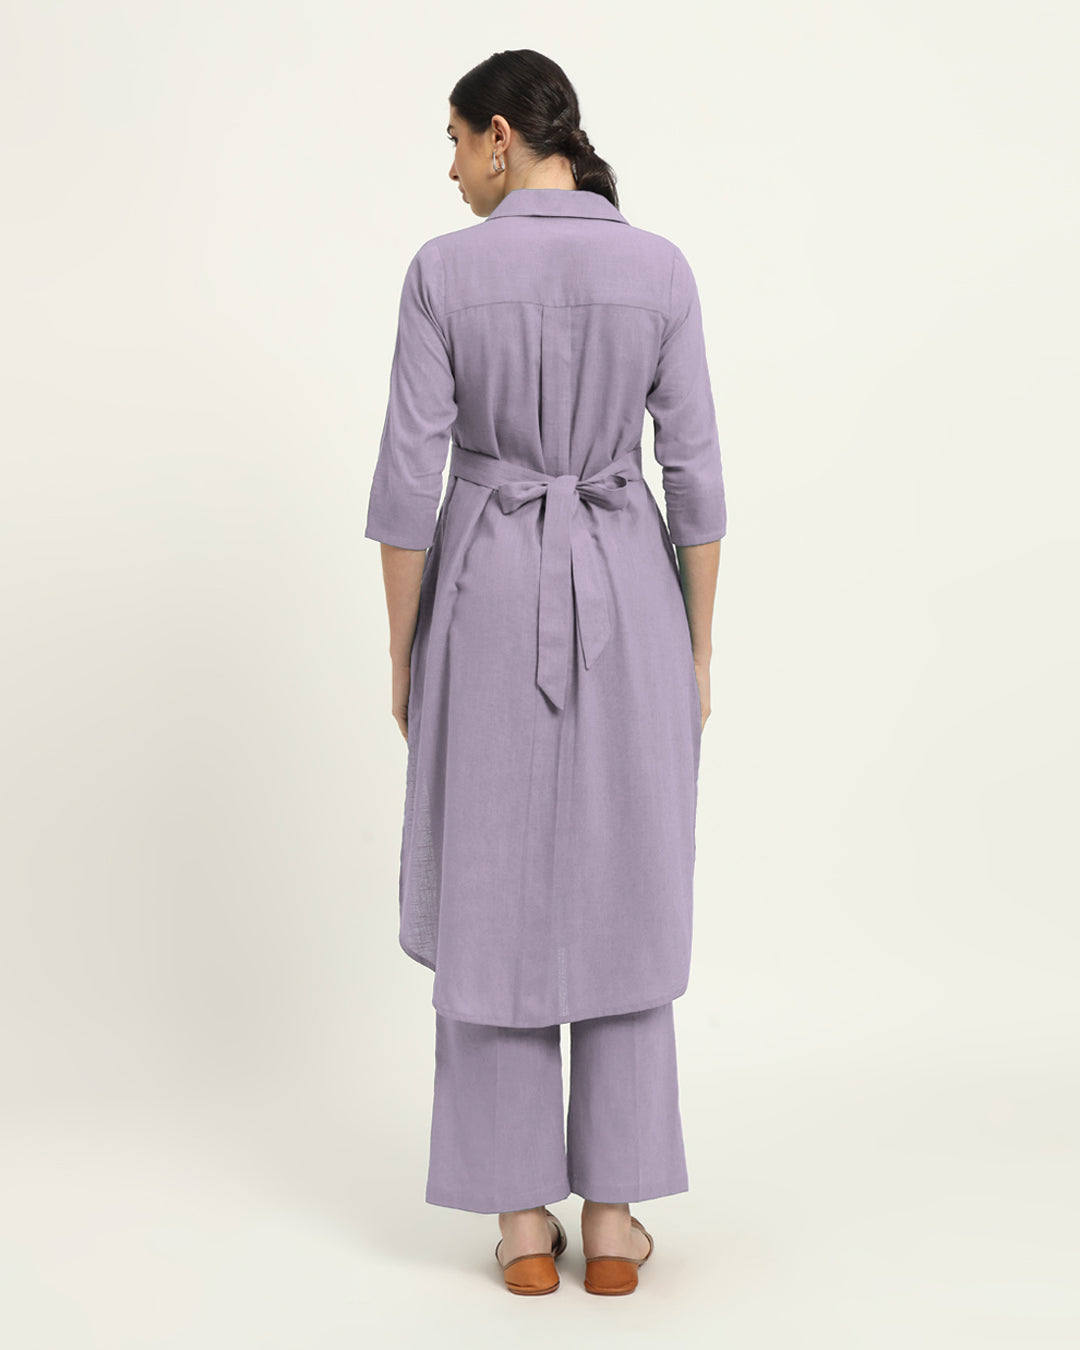 Combo: Iced Grey & Lilac Bellisimo Belted Solid Kurta